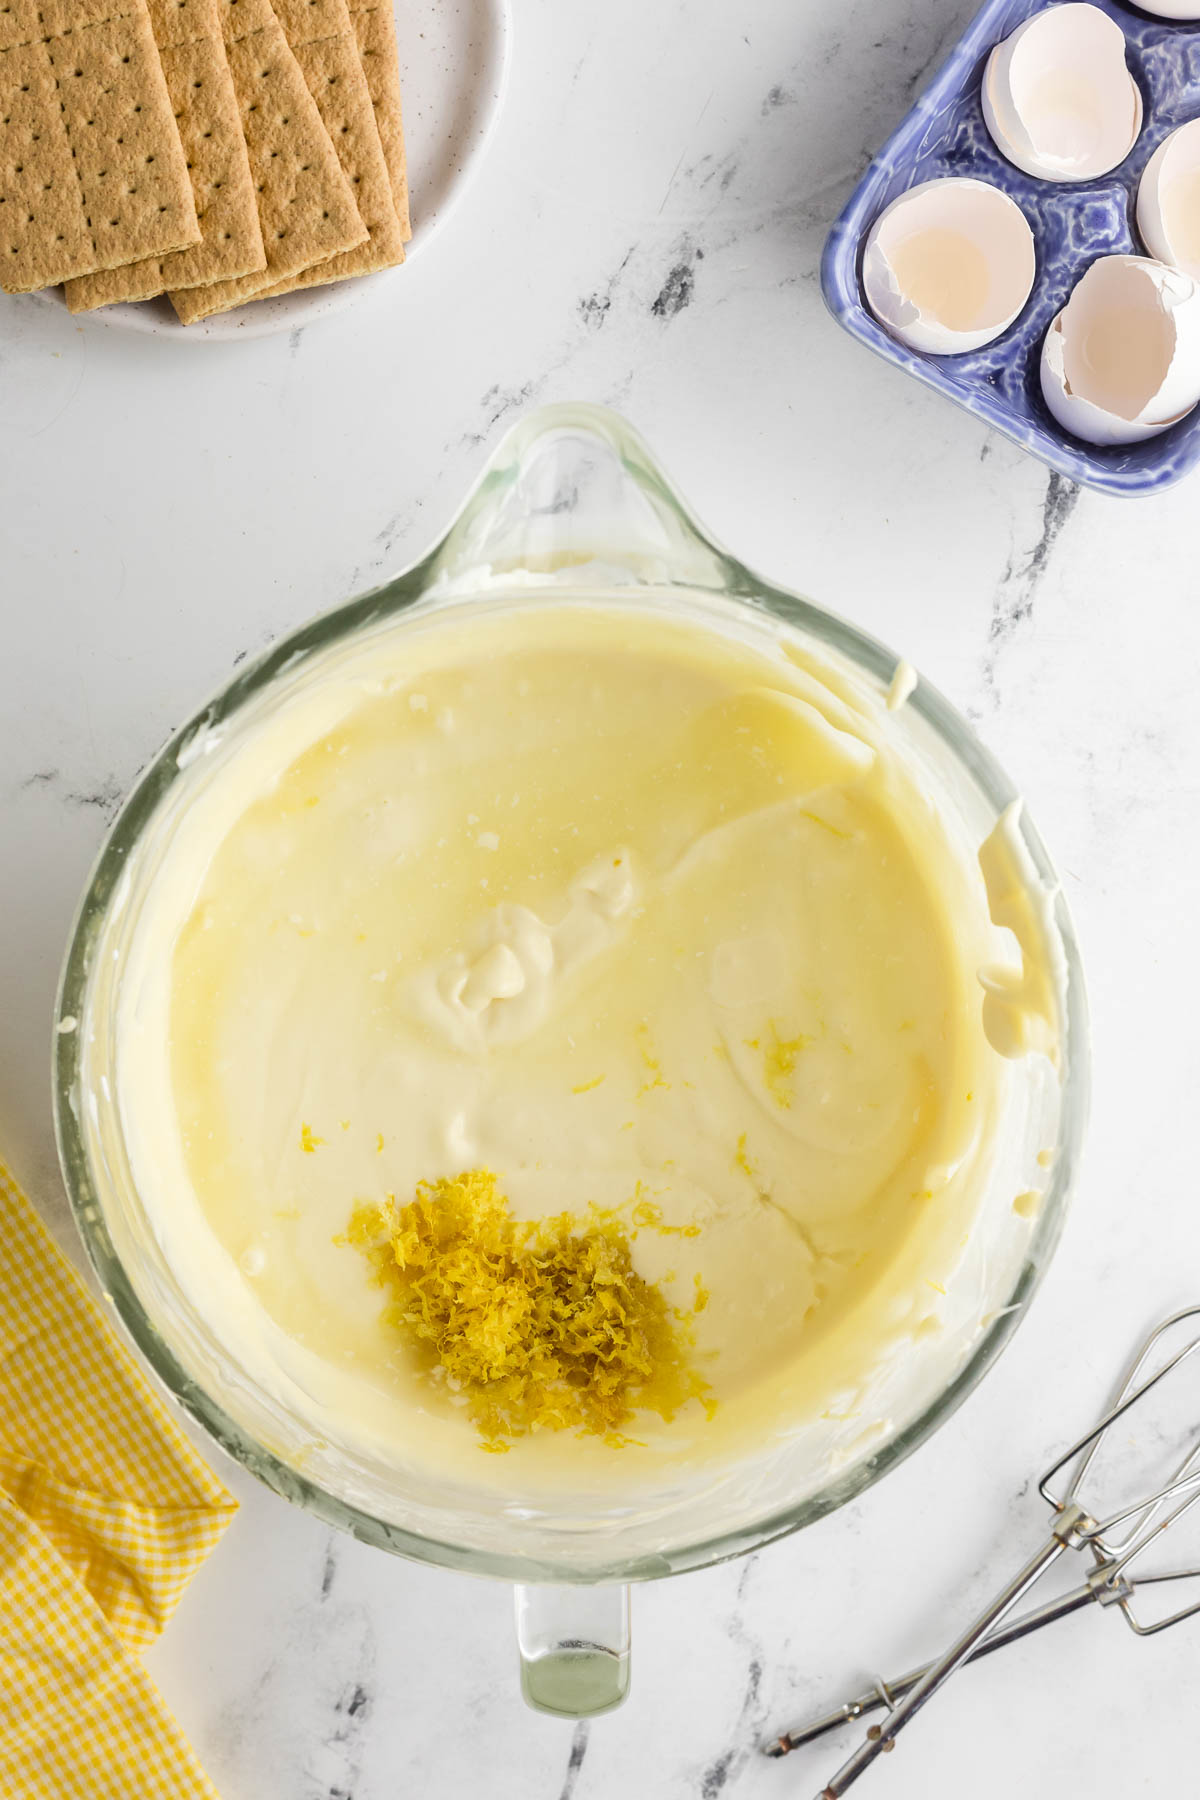 lemon juice and lemon zest added to cheesecake mixture in bowl